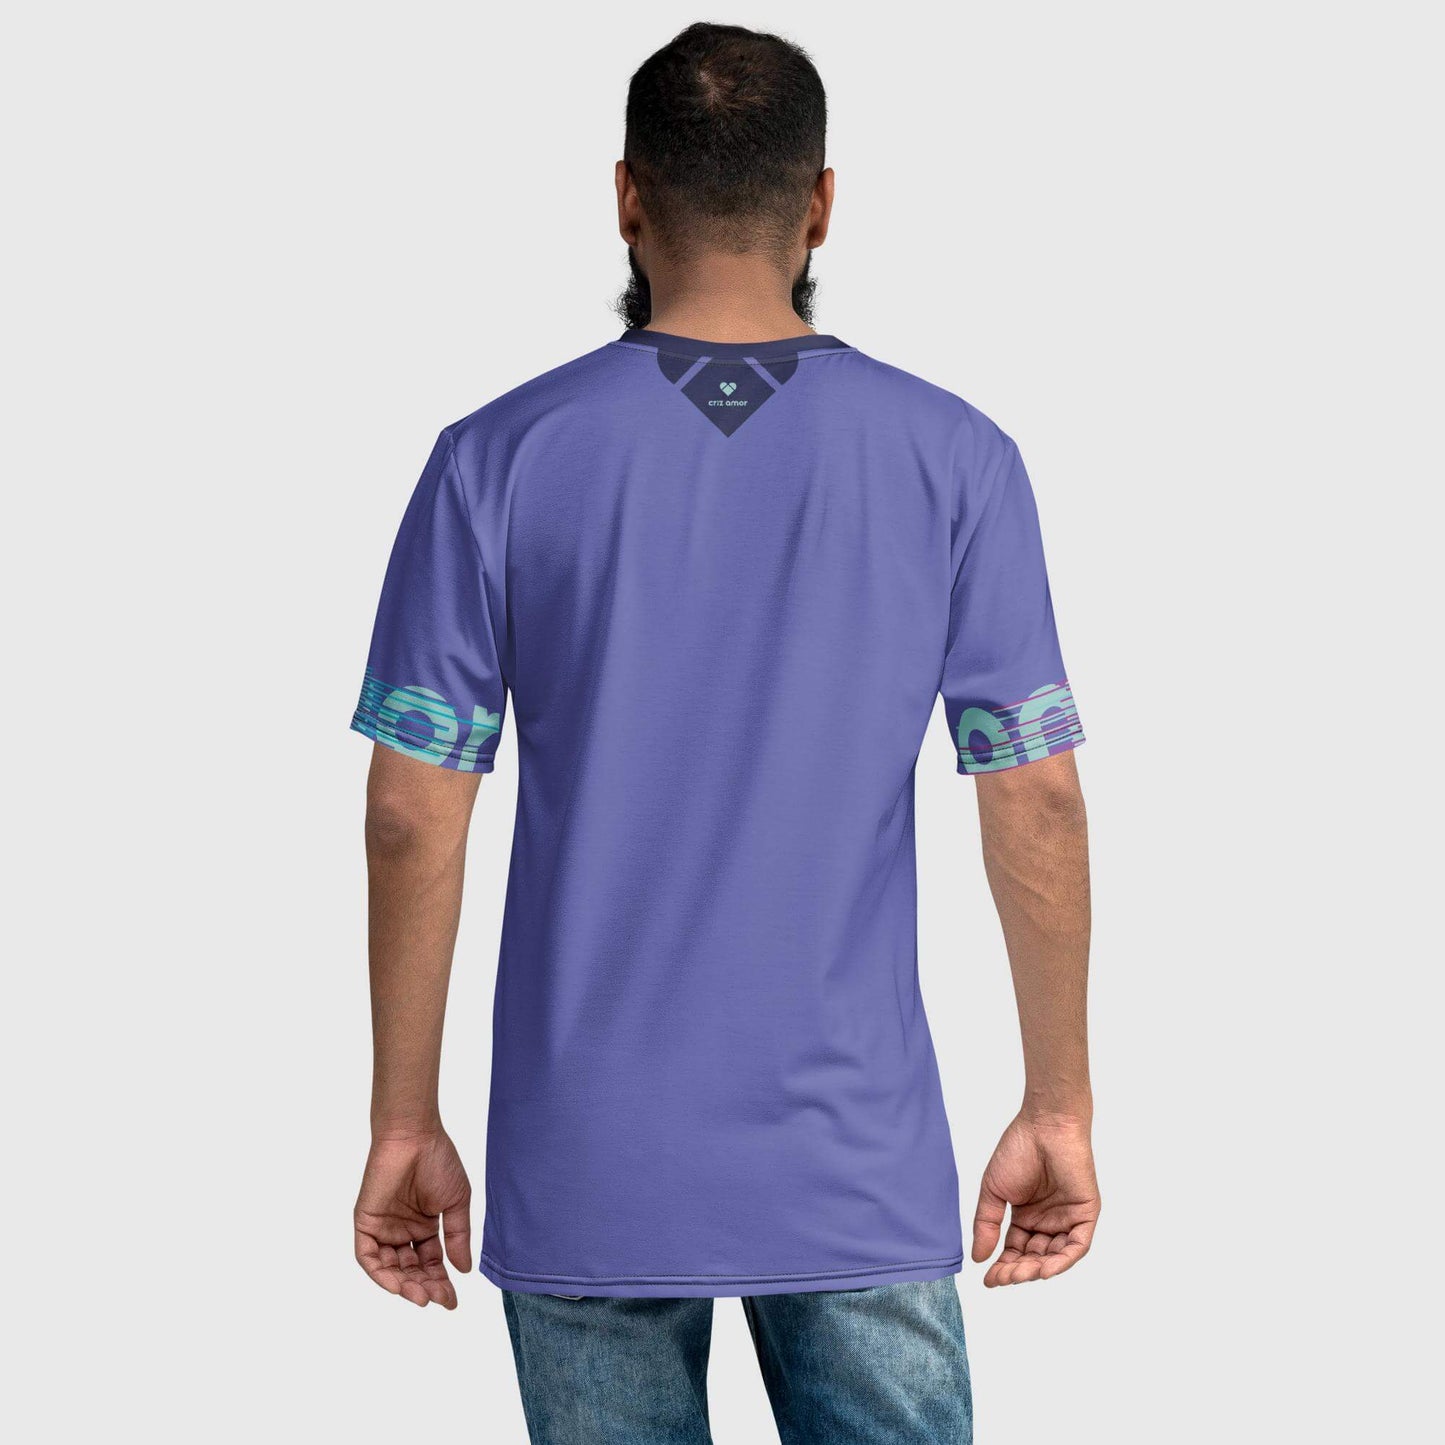 Men's T-Shirt for Casual and Active Wear - Periwinkle